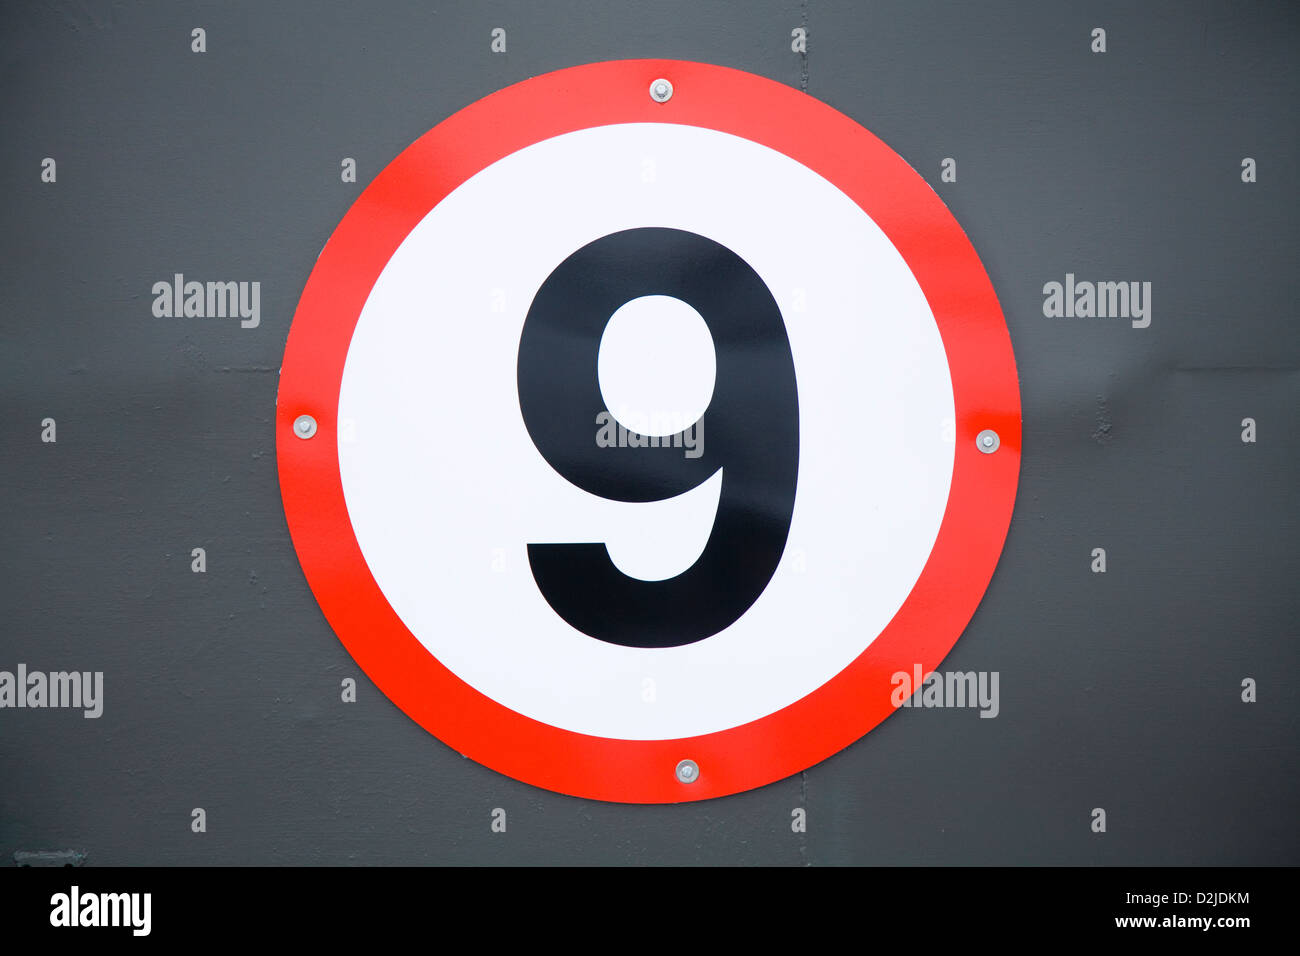 Sign showing the numeral / number 9. Based on a road traffic sign this is actually an unusual house number sign. Stock Photo